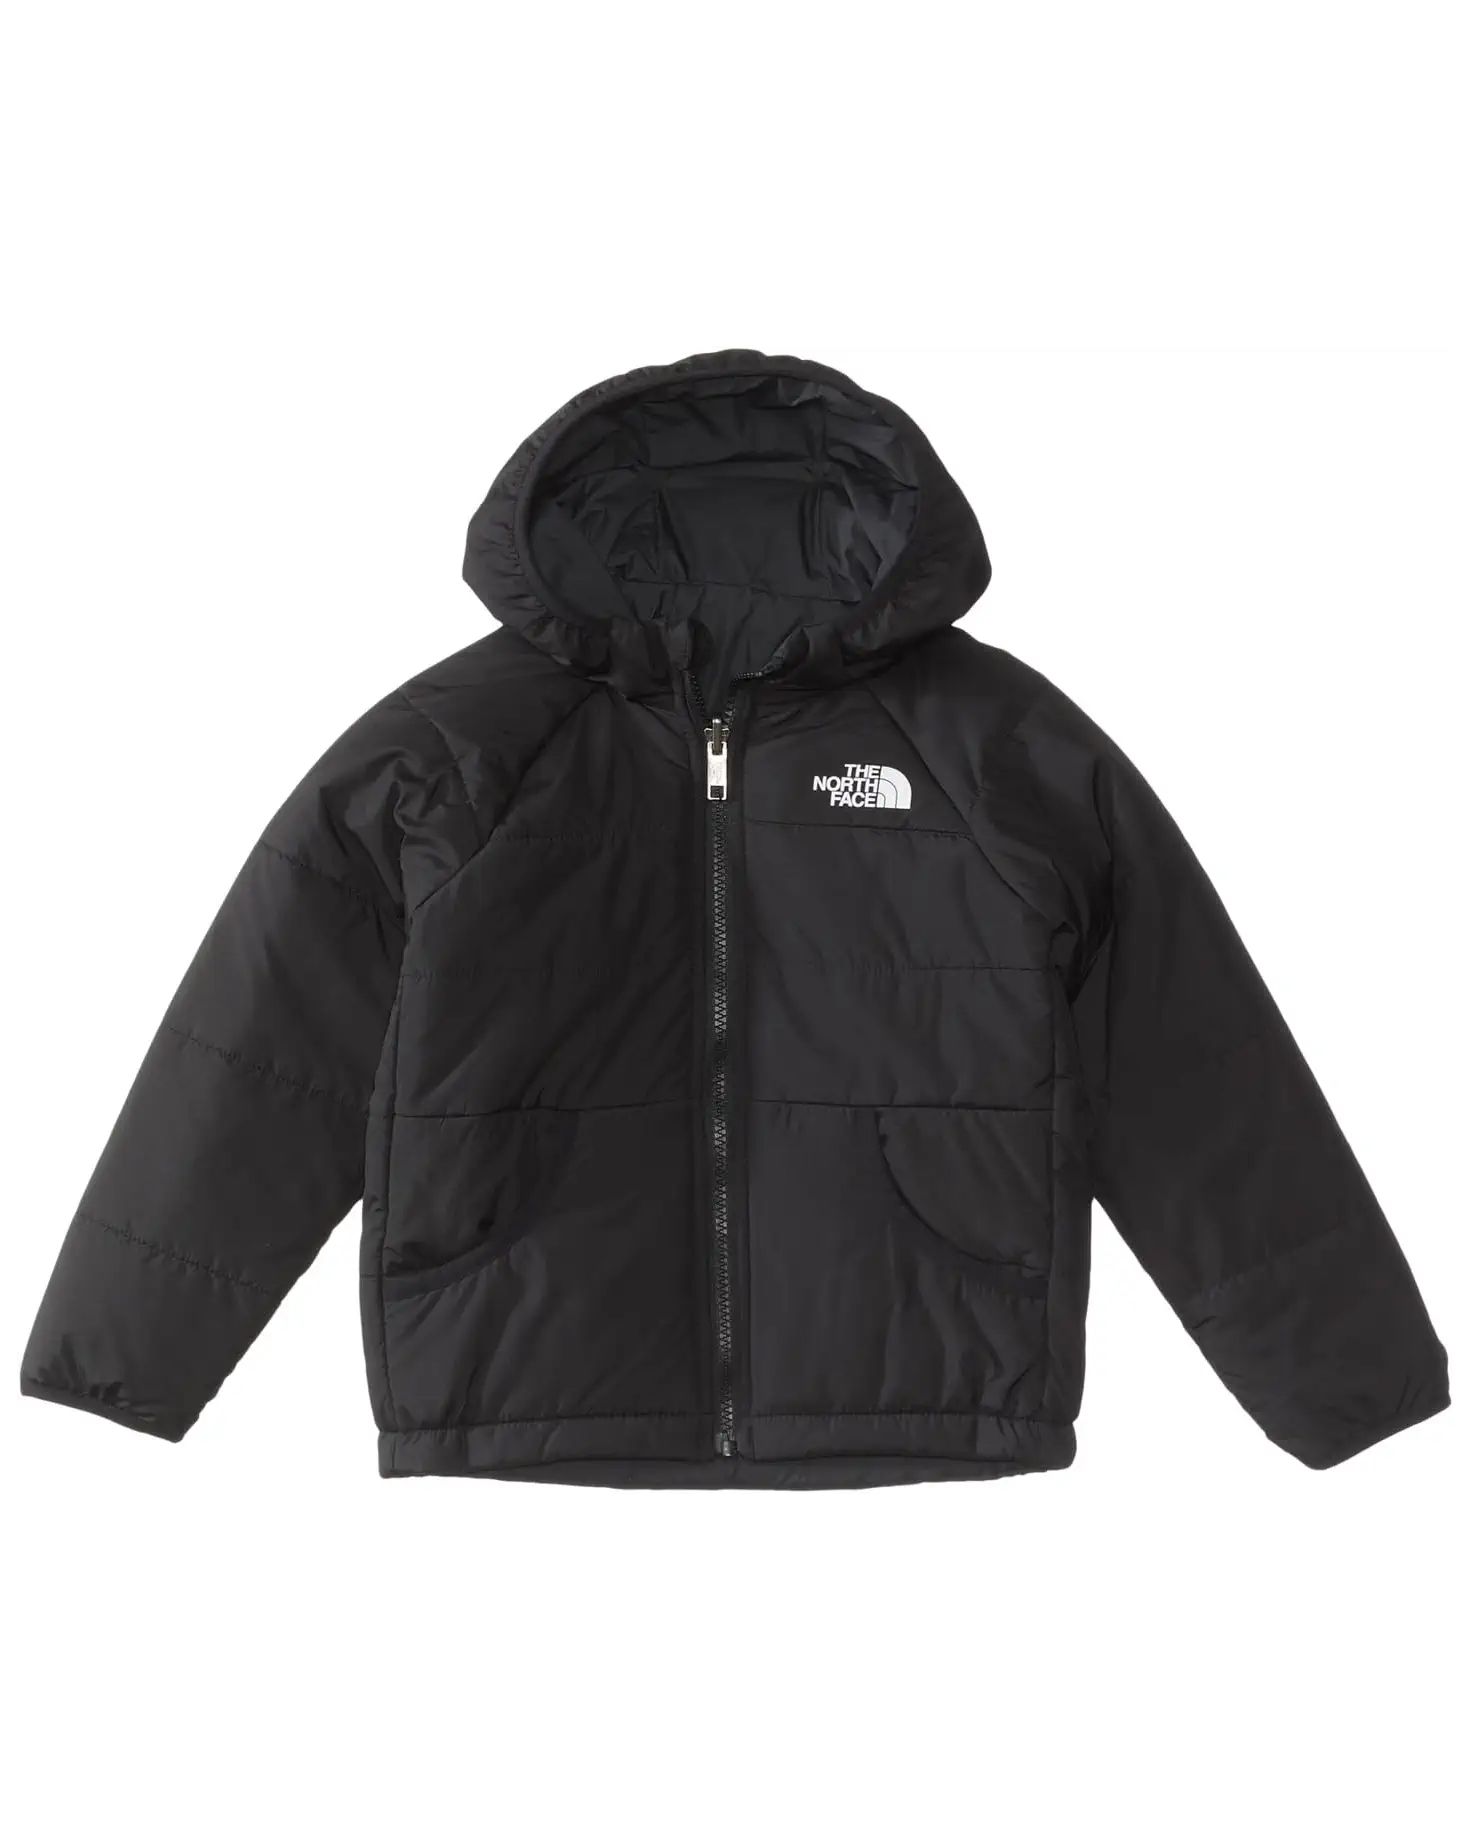 Reversible Perrito Hooded Jacket (Toddler) | Zappos